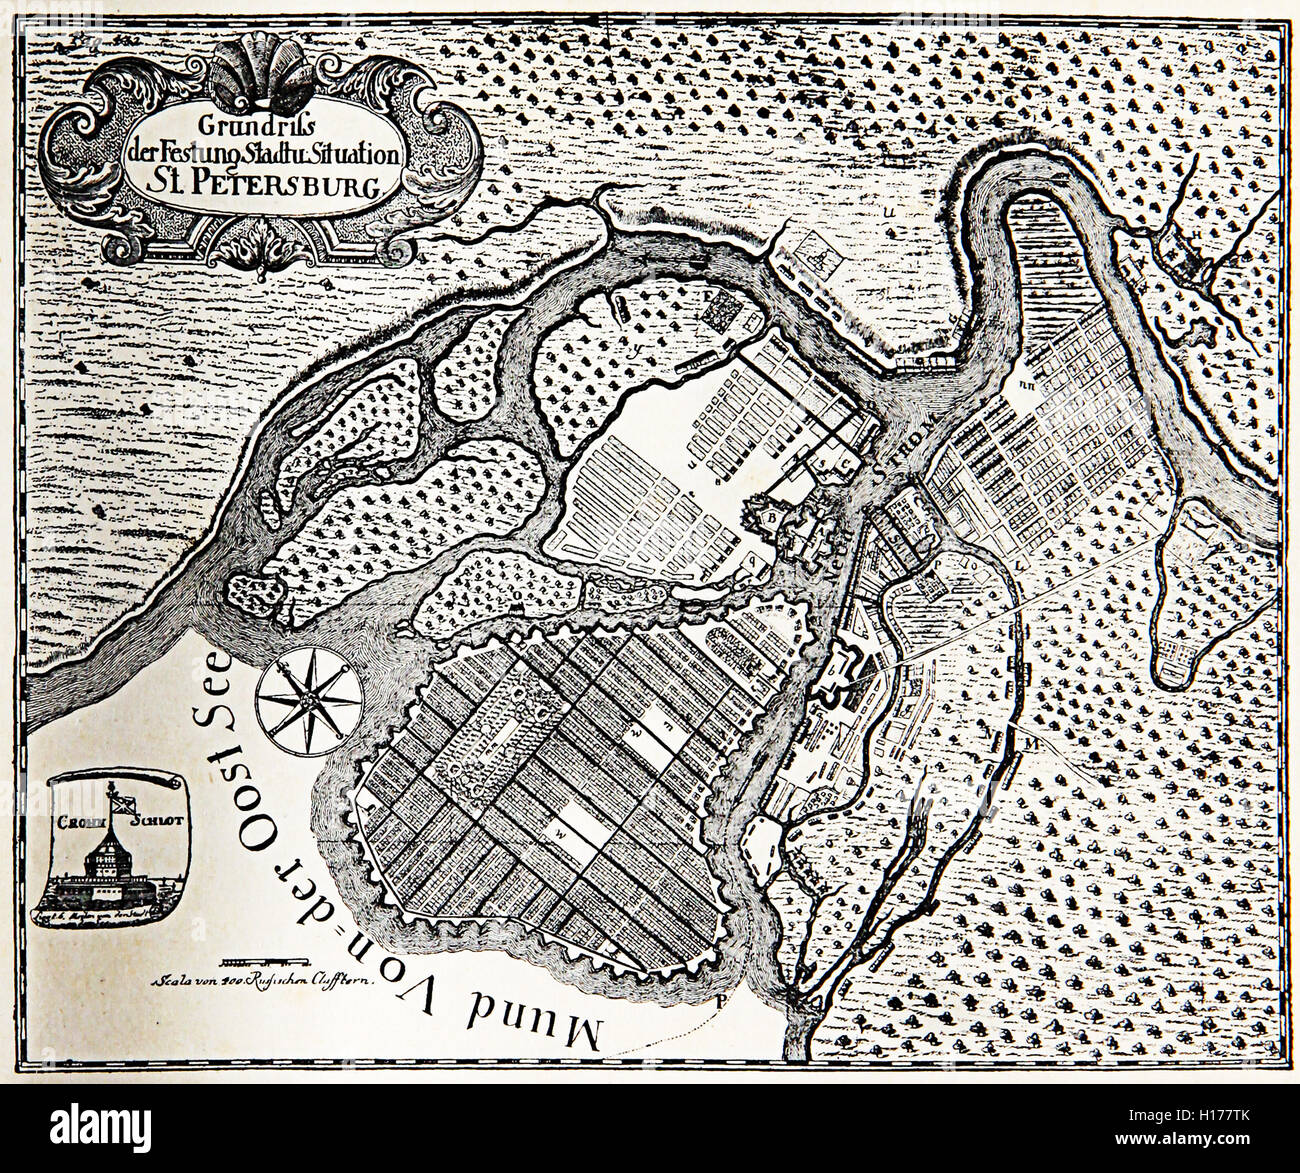 Vintage plan of St. Petersburg as a fortress at the mouth of the Neva River on the Baltic sea in 1738 Stock Photo